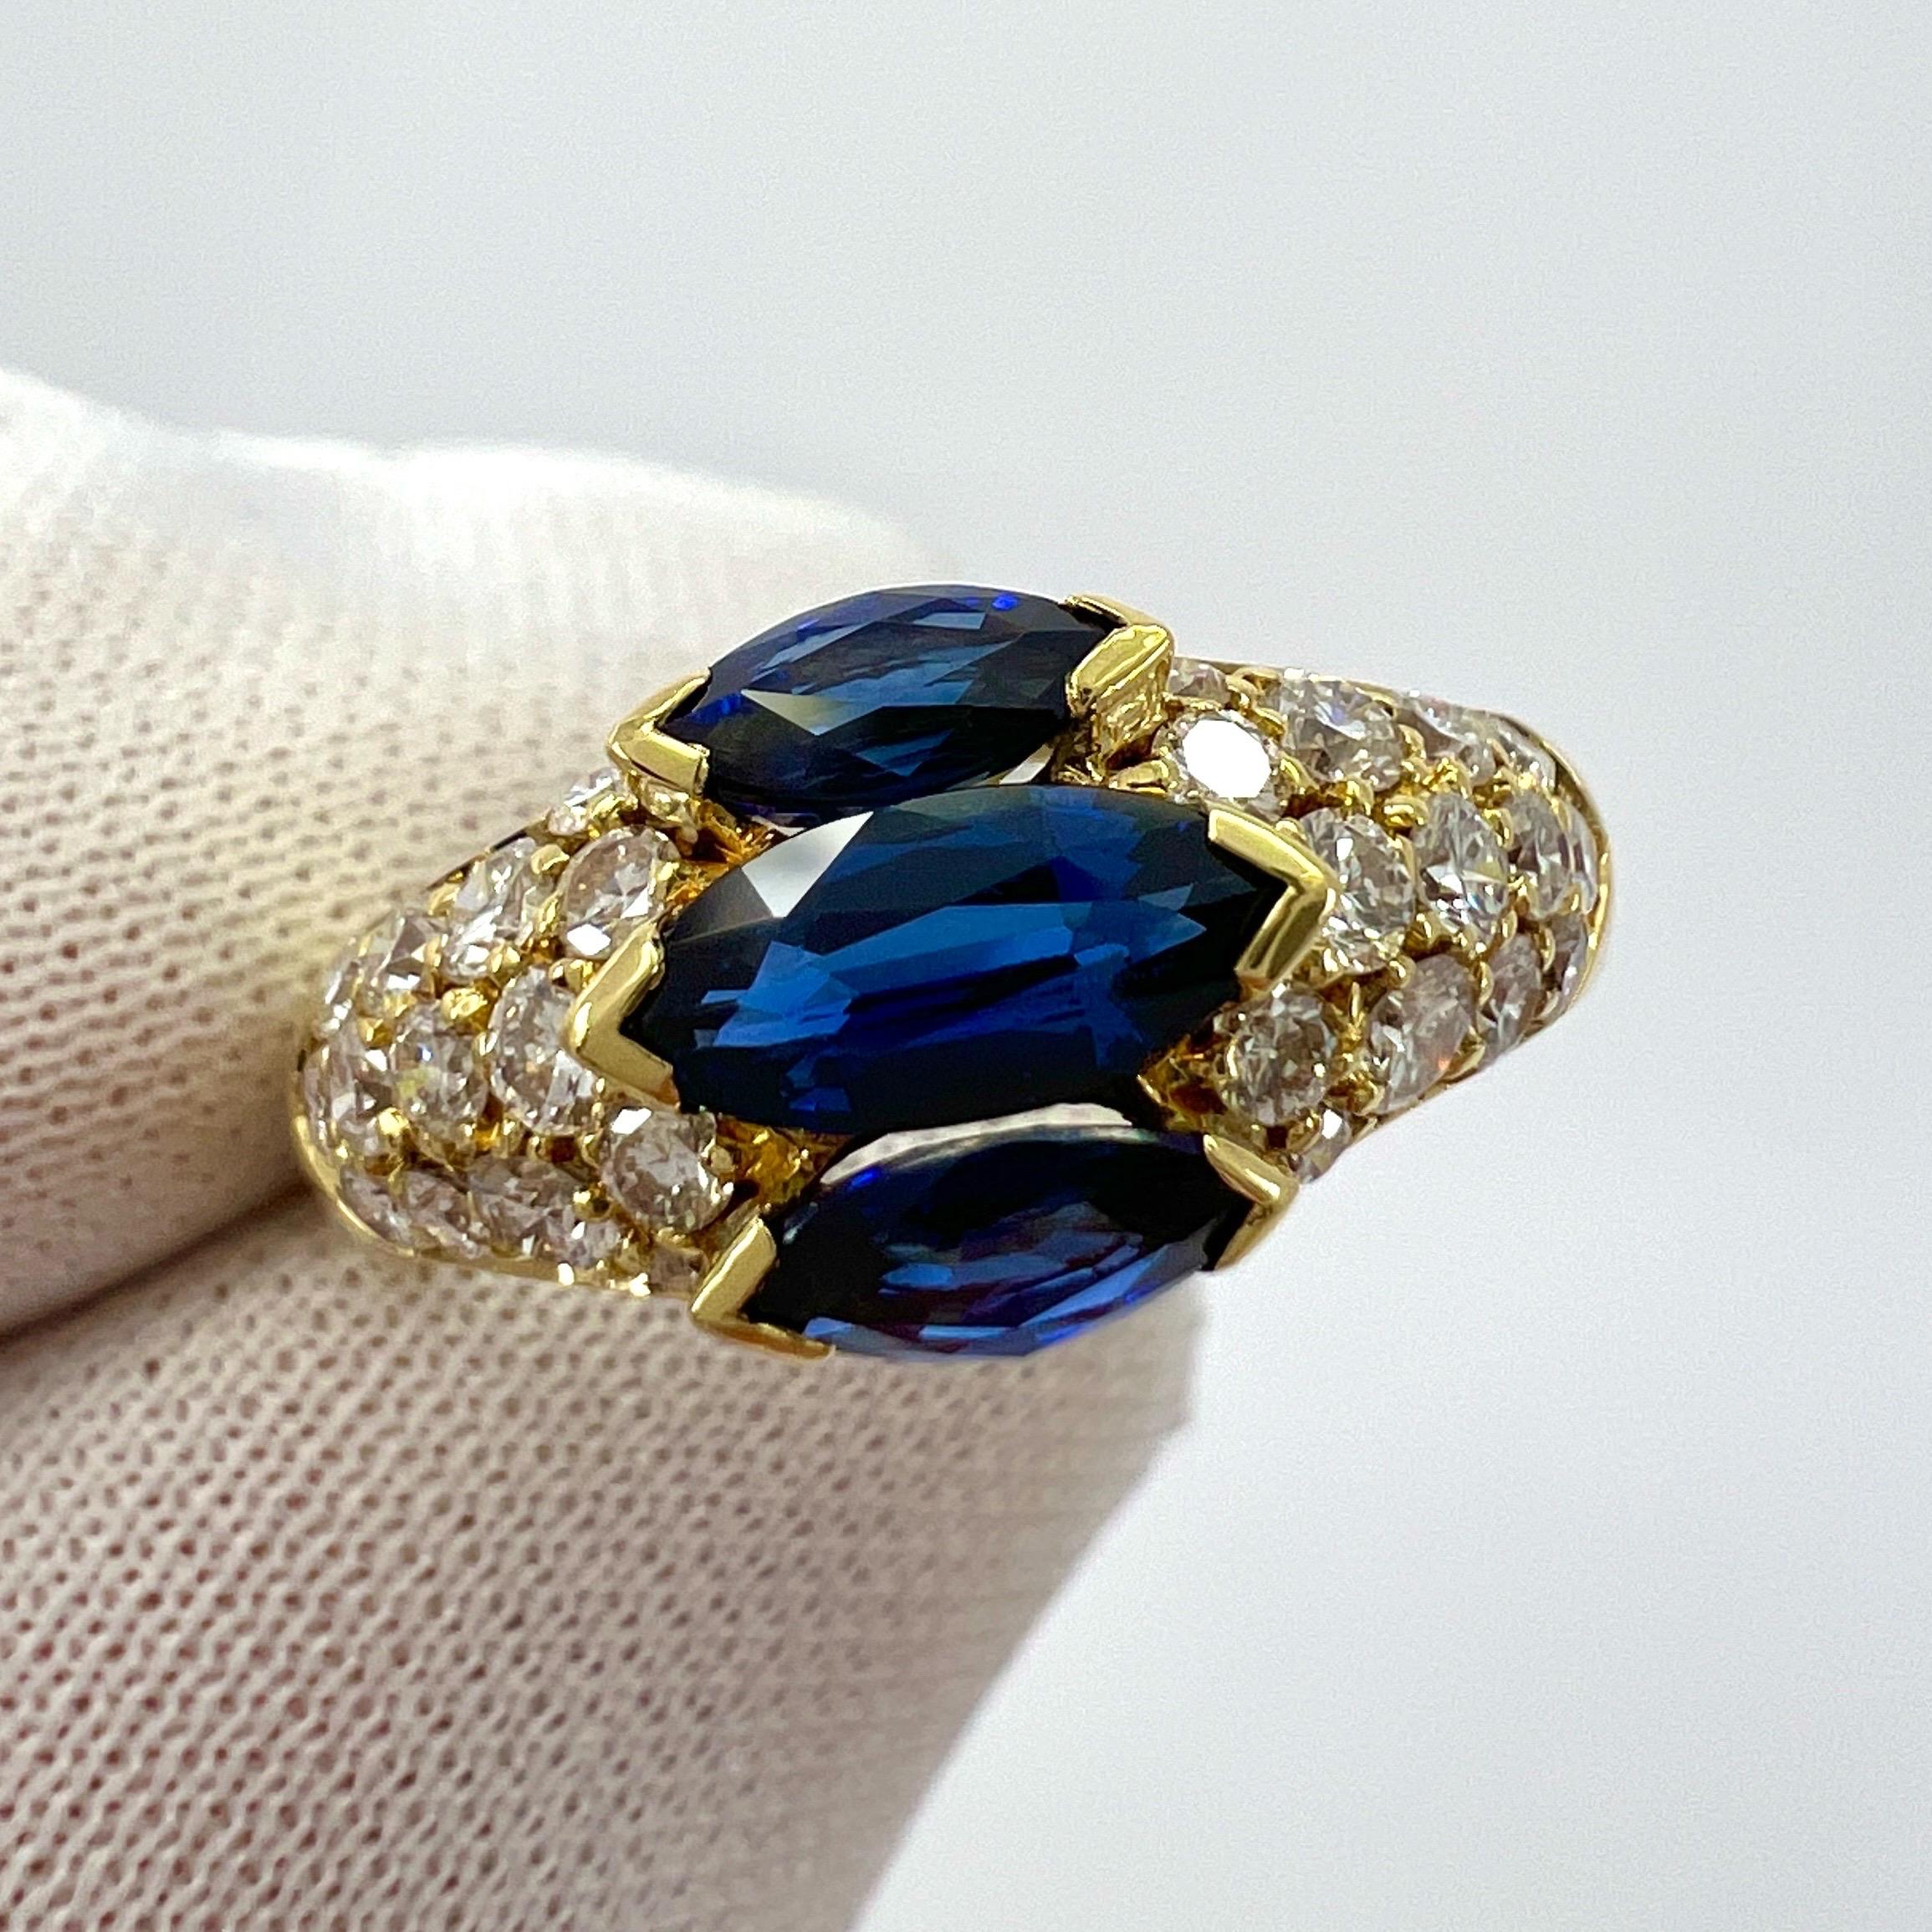 Marquise Cut Rare Vintage Van Cleef & Arpels Marquise Blue Sapphire And Diamond Cocktail Ring